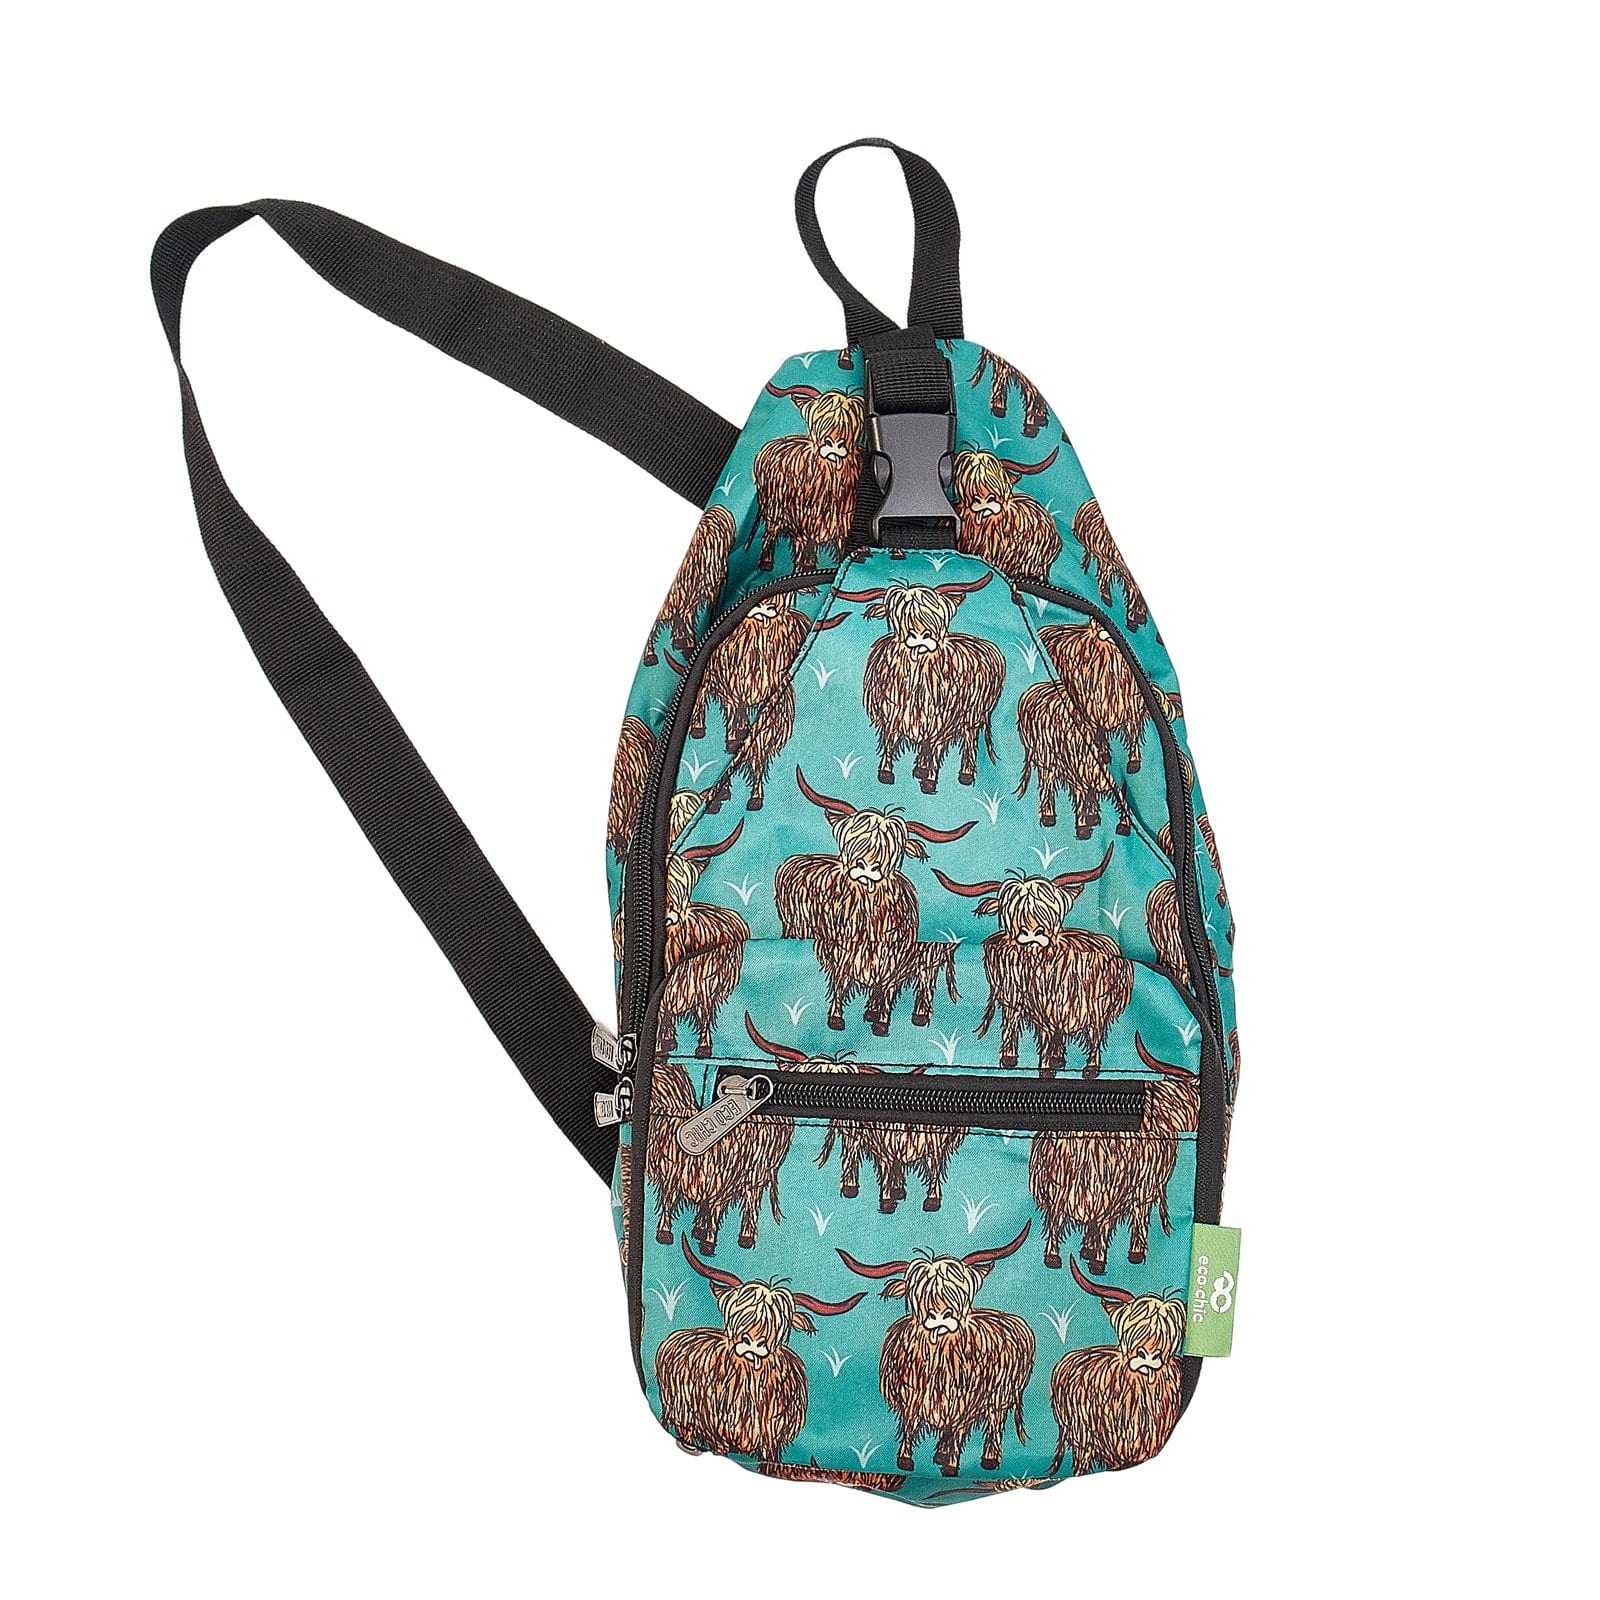 Eco Chic Teal Eco Chic Lightweight Foldable Crossbody Bag Highland Cow